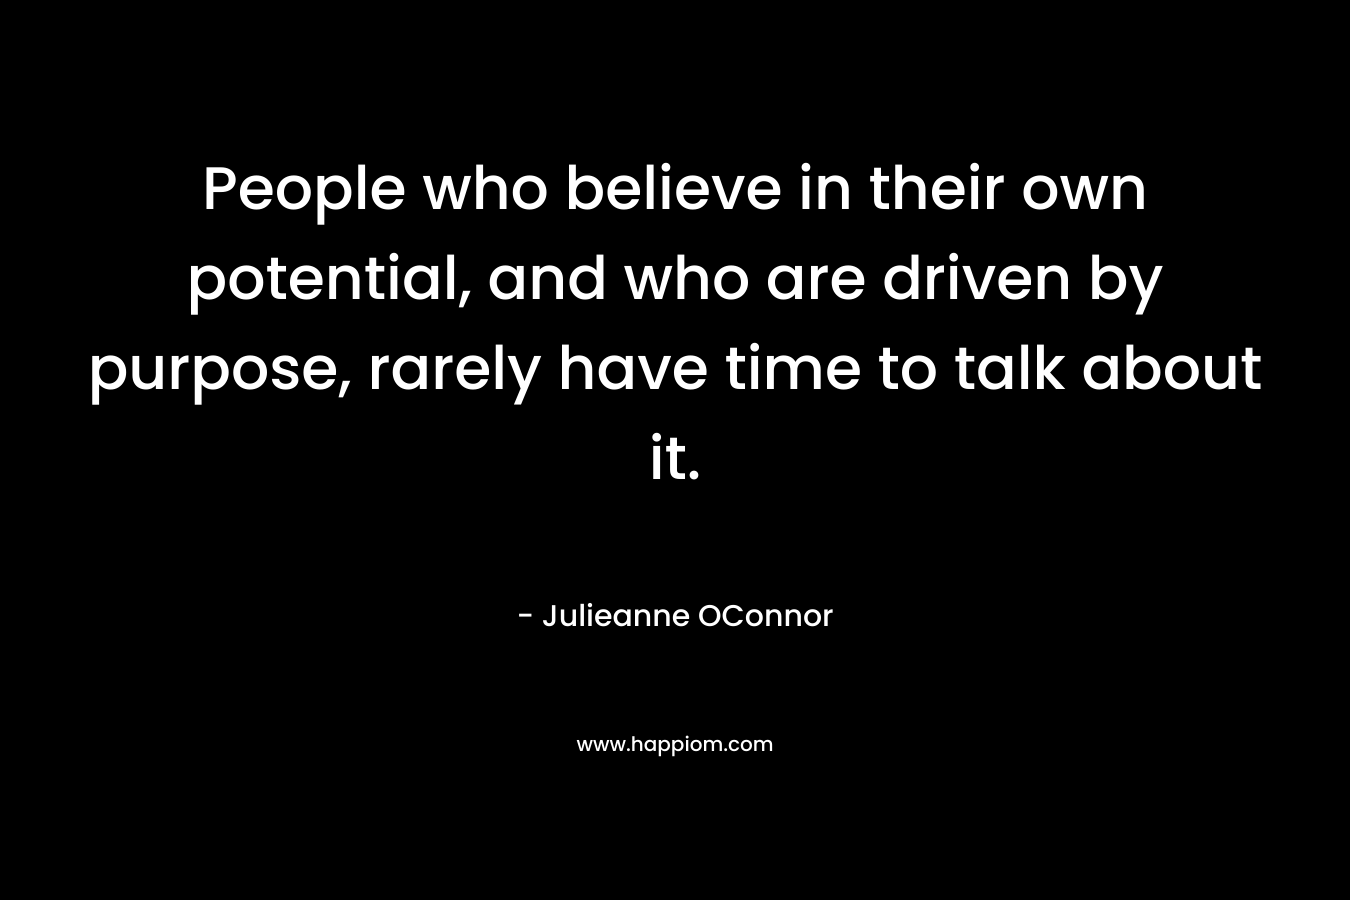 People who believe in their own potential, and who are driven by purpose, rarely have time to talk about it.